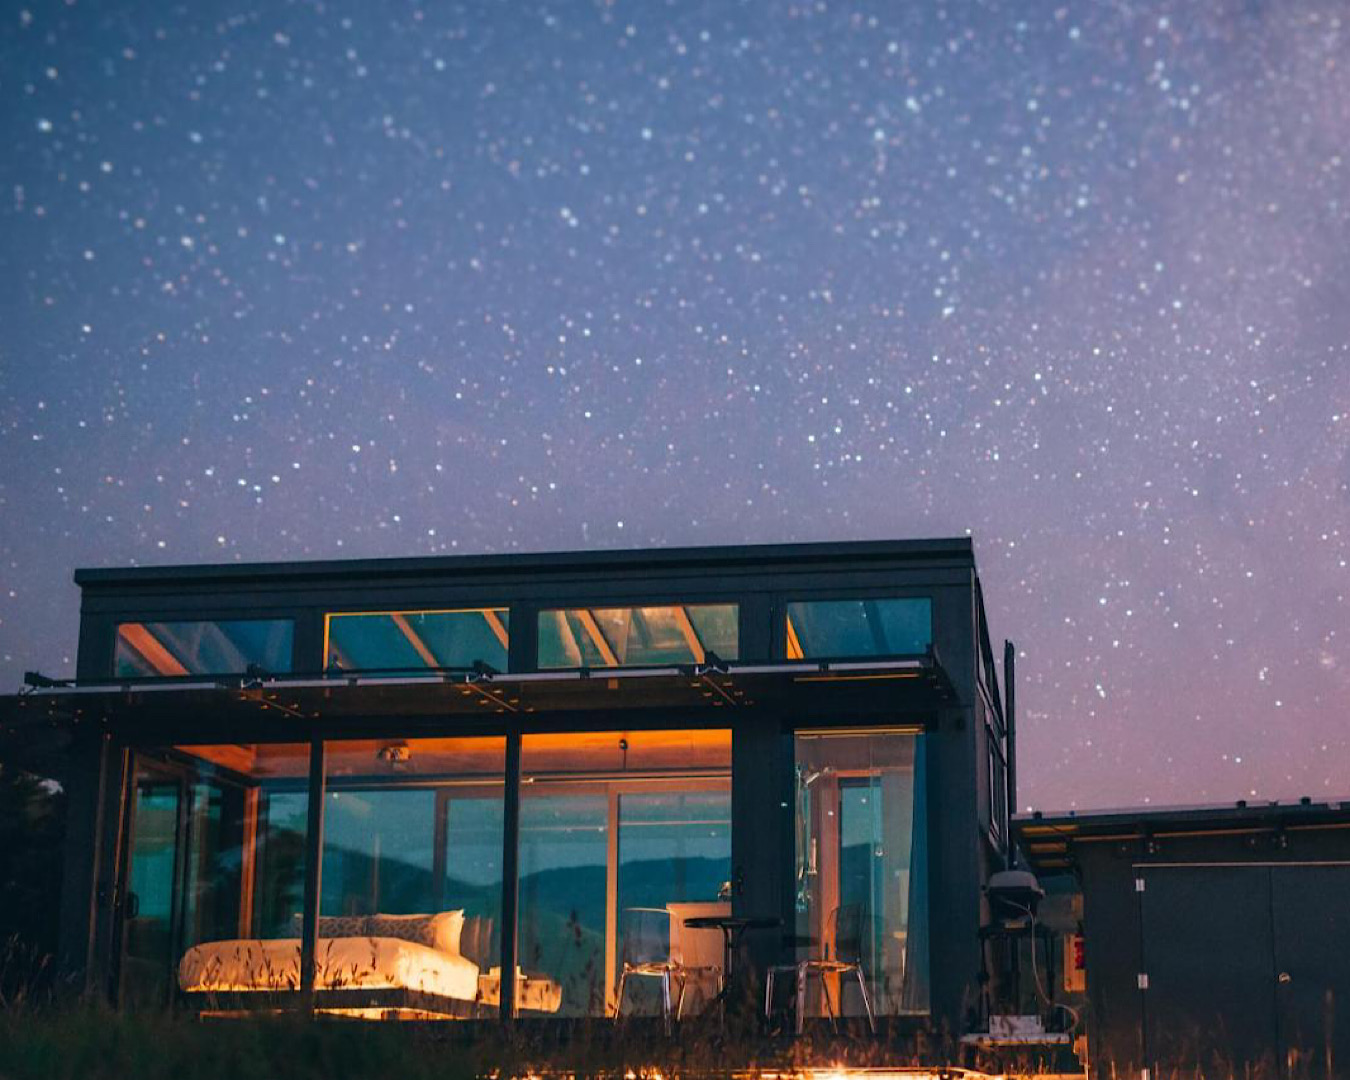 A glass cabin sits on a hill at nighttime, lit from within. Overhead a billion stars shine brightly. 